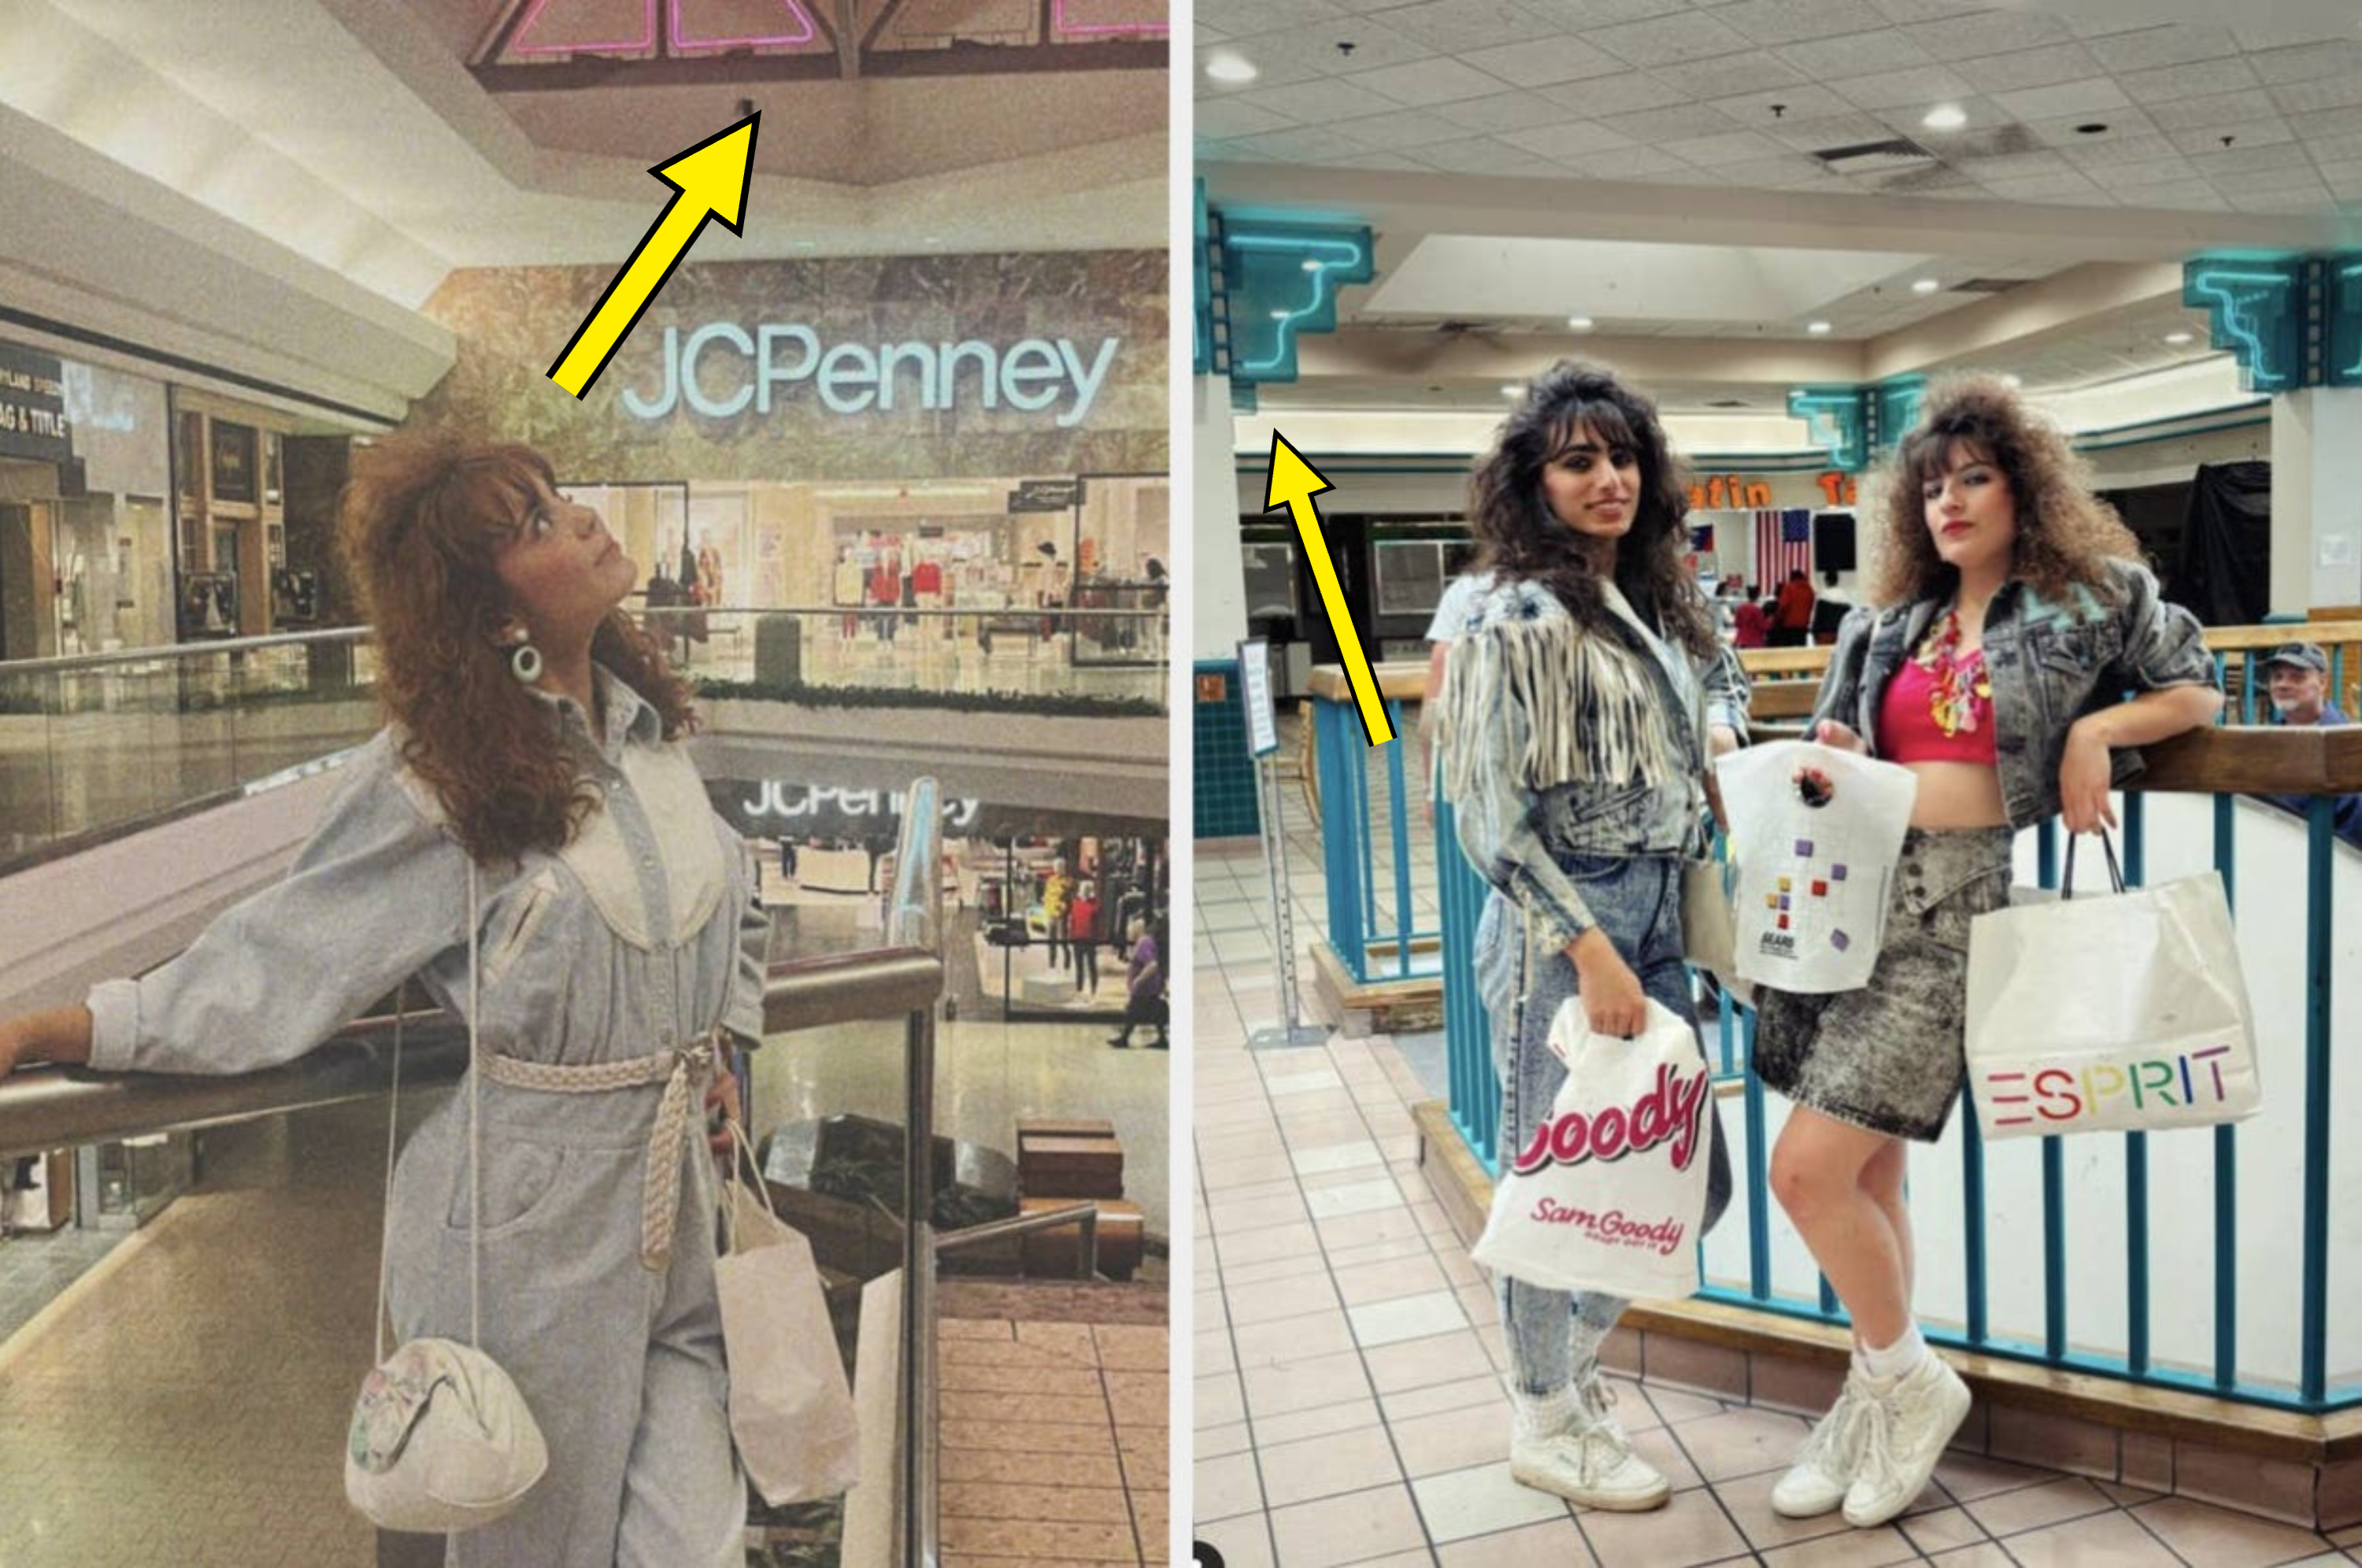 Two images side by side of people in 1980s outfits. Left: Woman in a jumpsuit poses at a mall near JCPenney. Right: Two women in denim and patterned clothing hold shopping bags